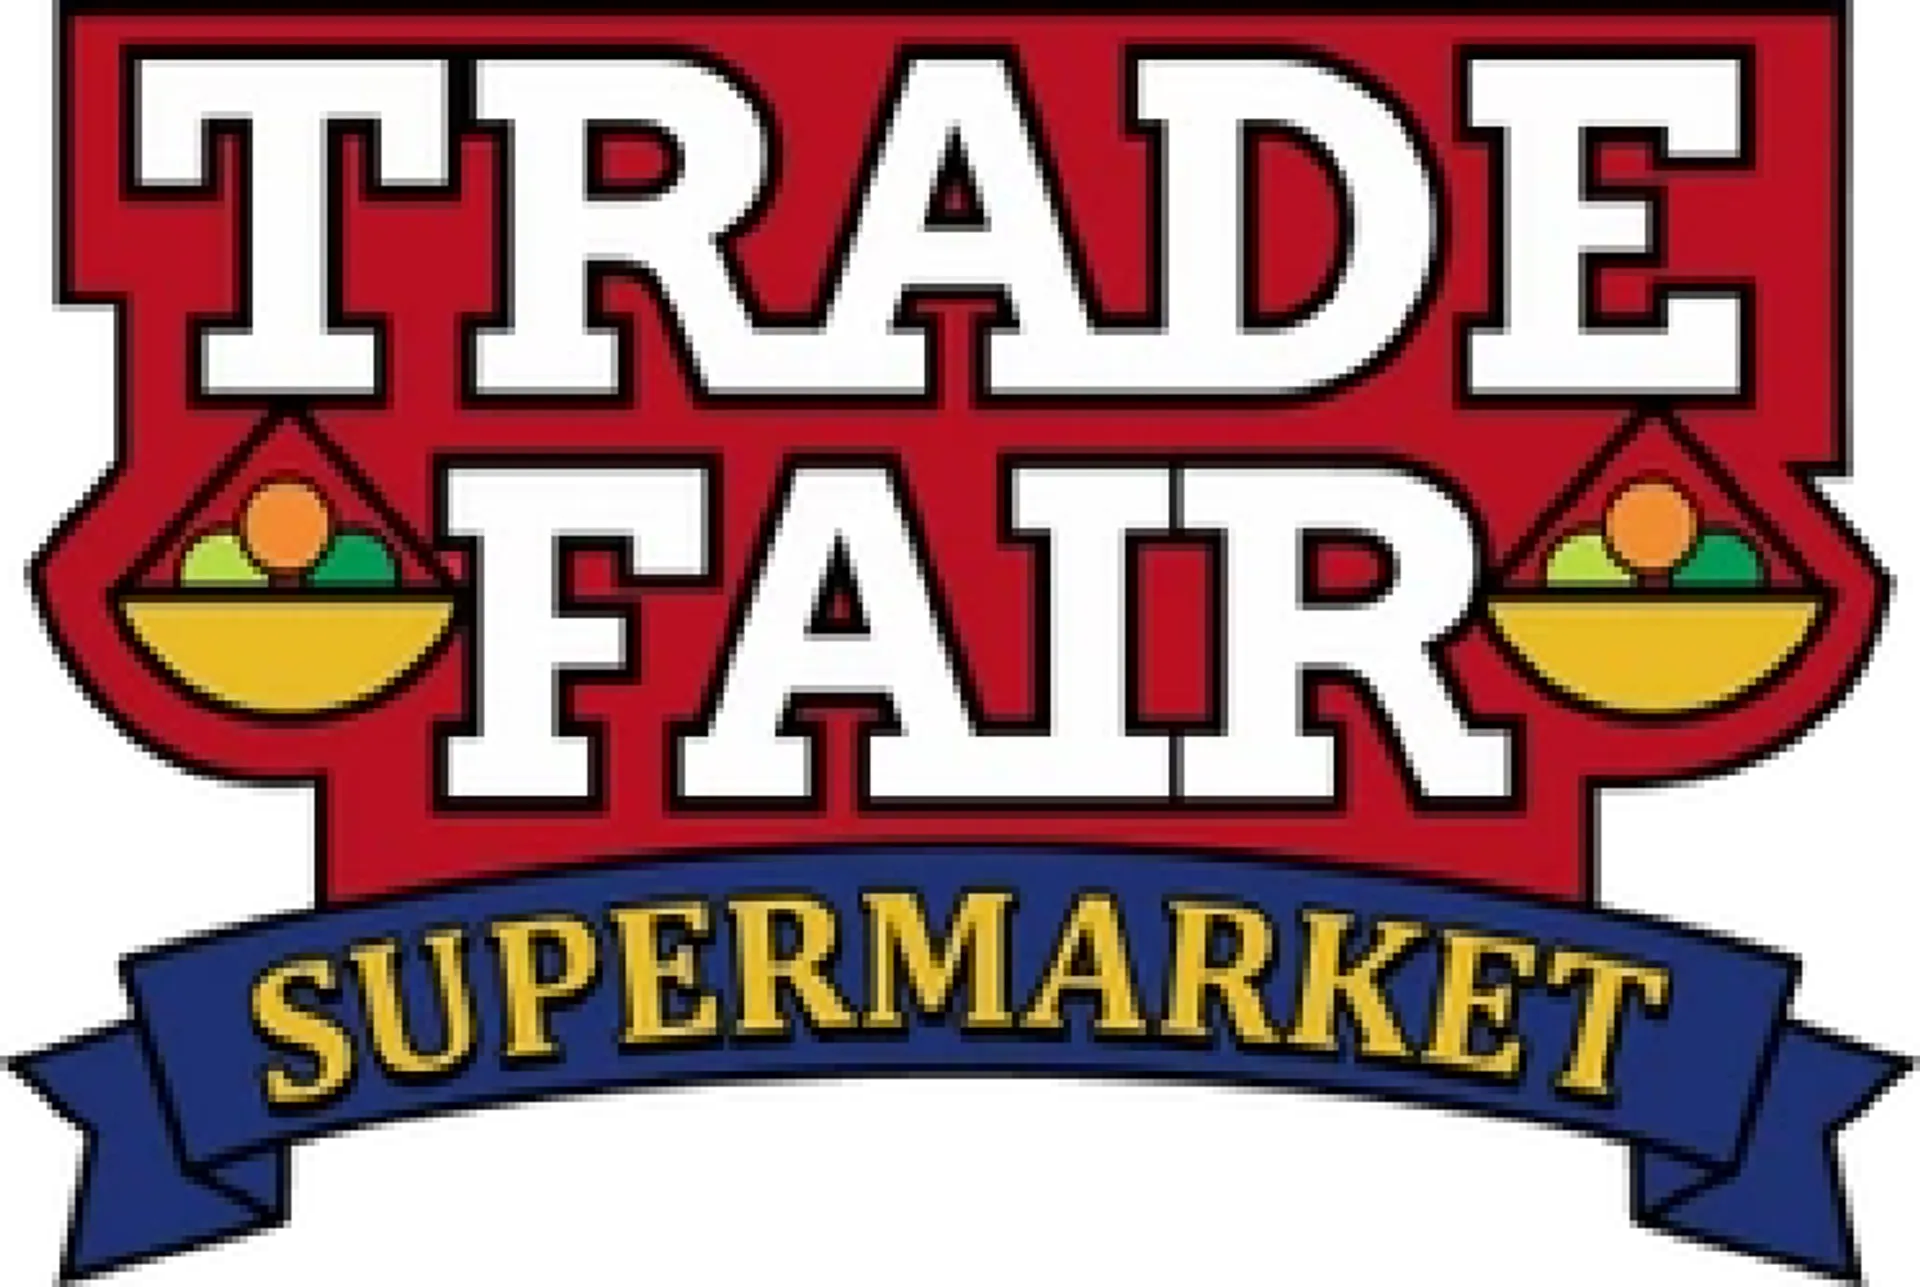 TRADE FAIR SUPERMARKET logo. Current weekly ad